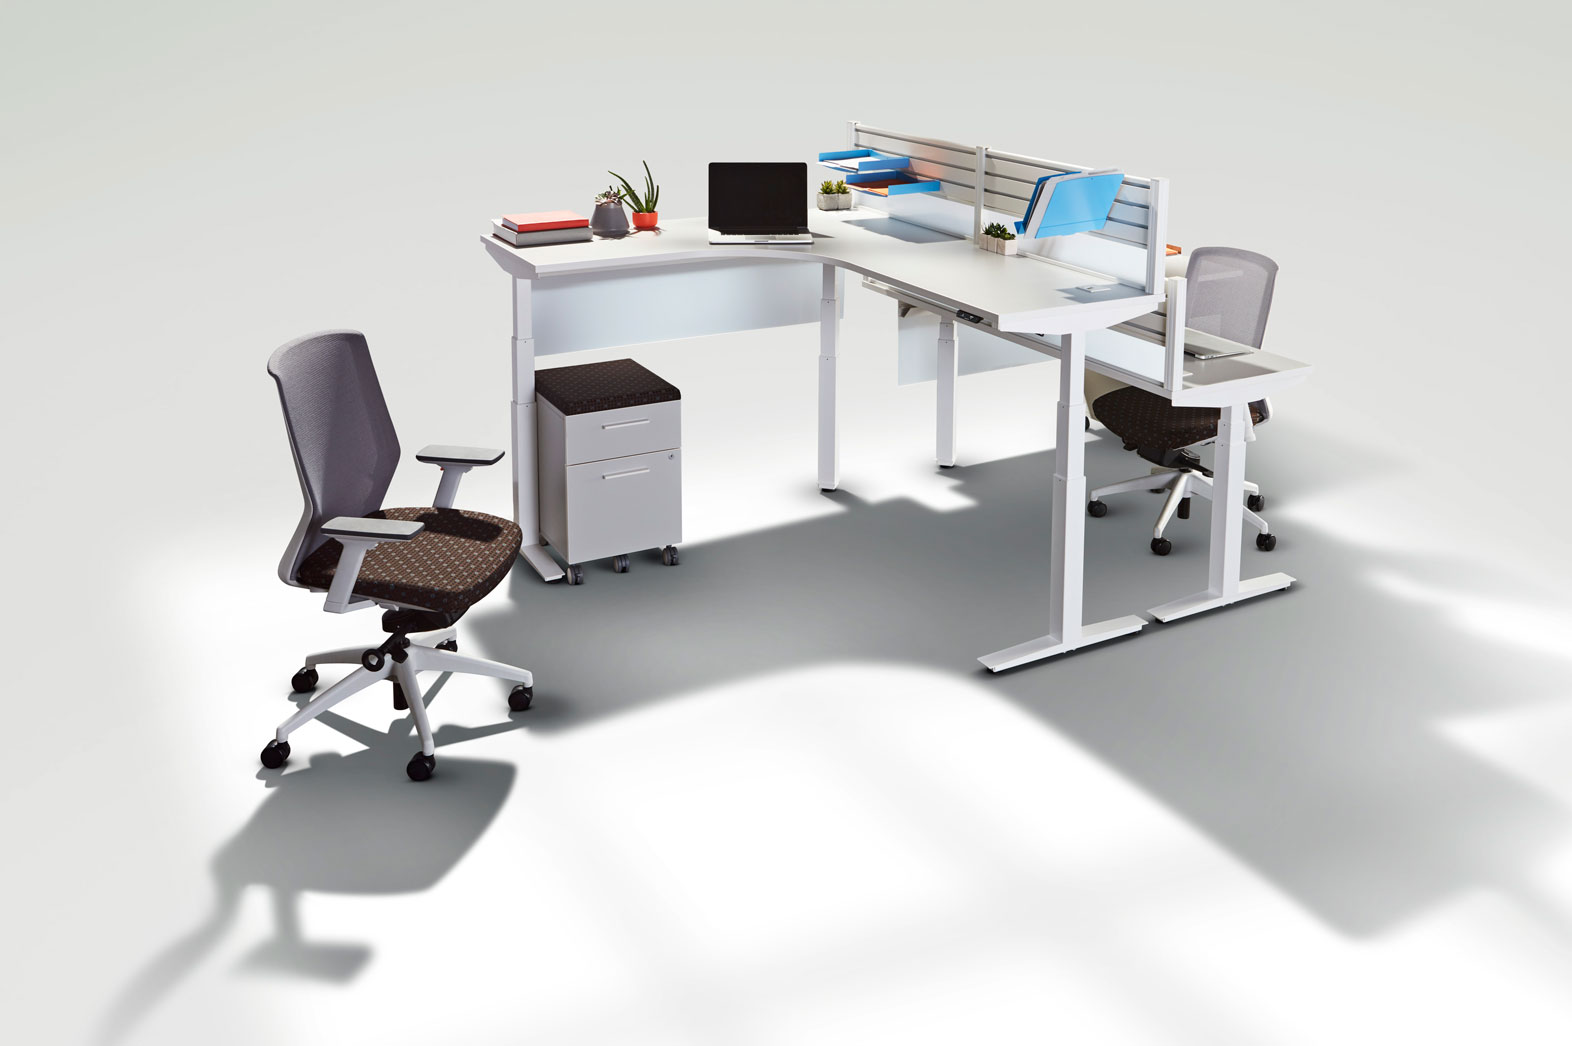 Tayco's Volley Adjustable Height Table with J1 Ergonomic Chair